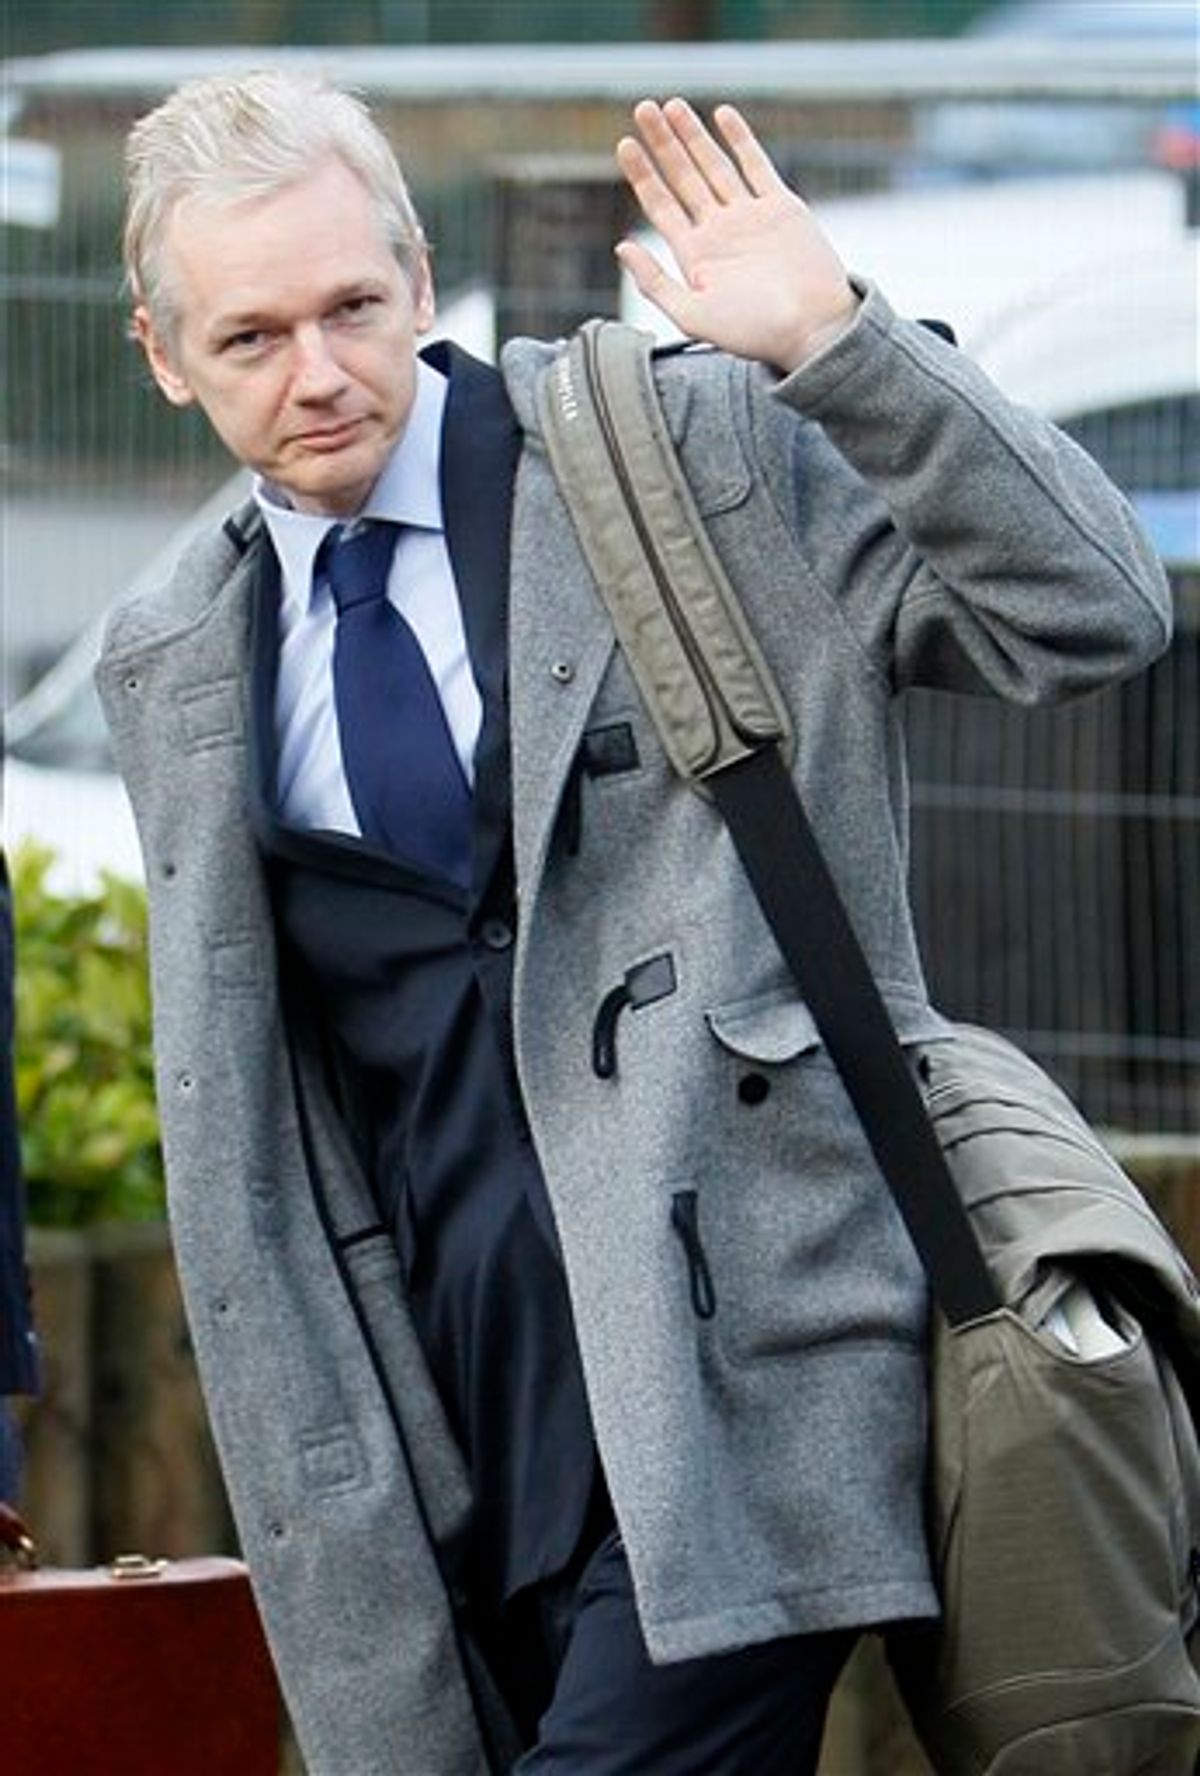 WikiLeaks founder Julian Assange arrives at Belmarsh Magistrate's court in London for his extradition hearing, Tuesday, Jan. 11, 2011. (AP Photo/Alastair Grant) (AP)